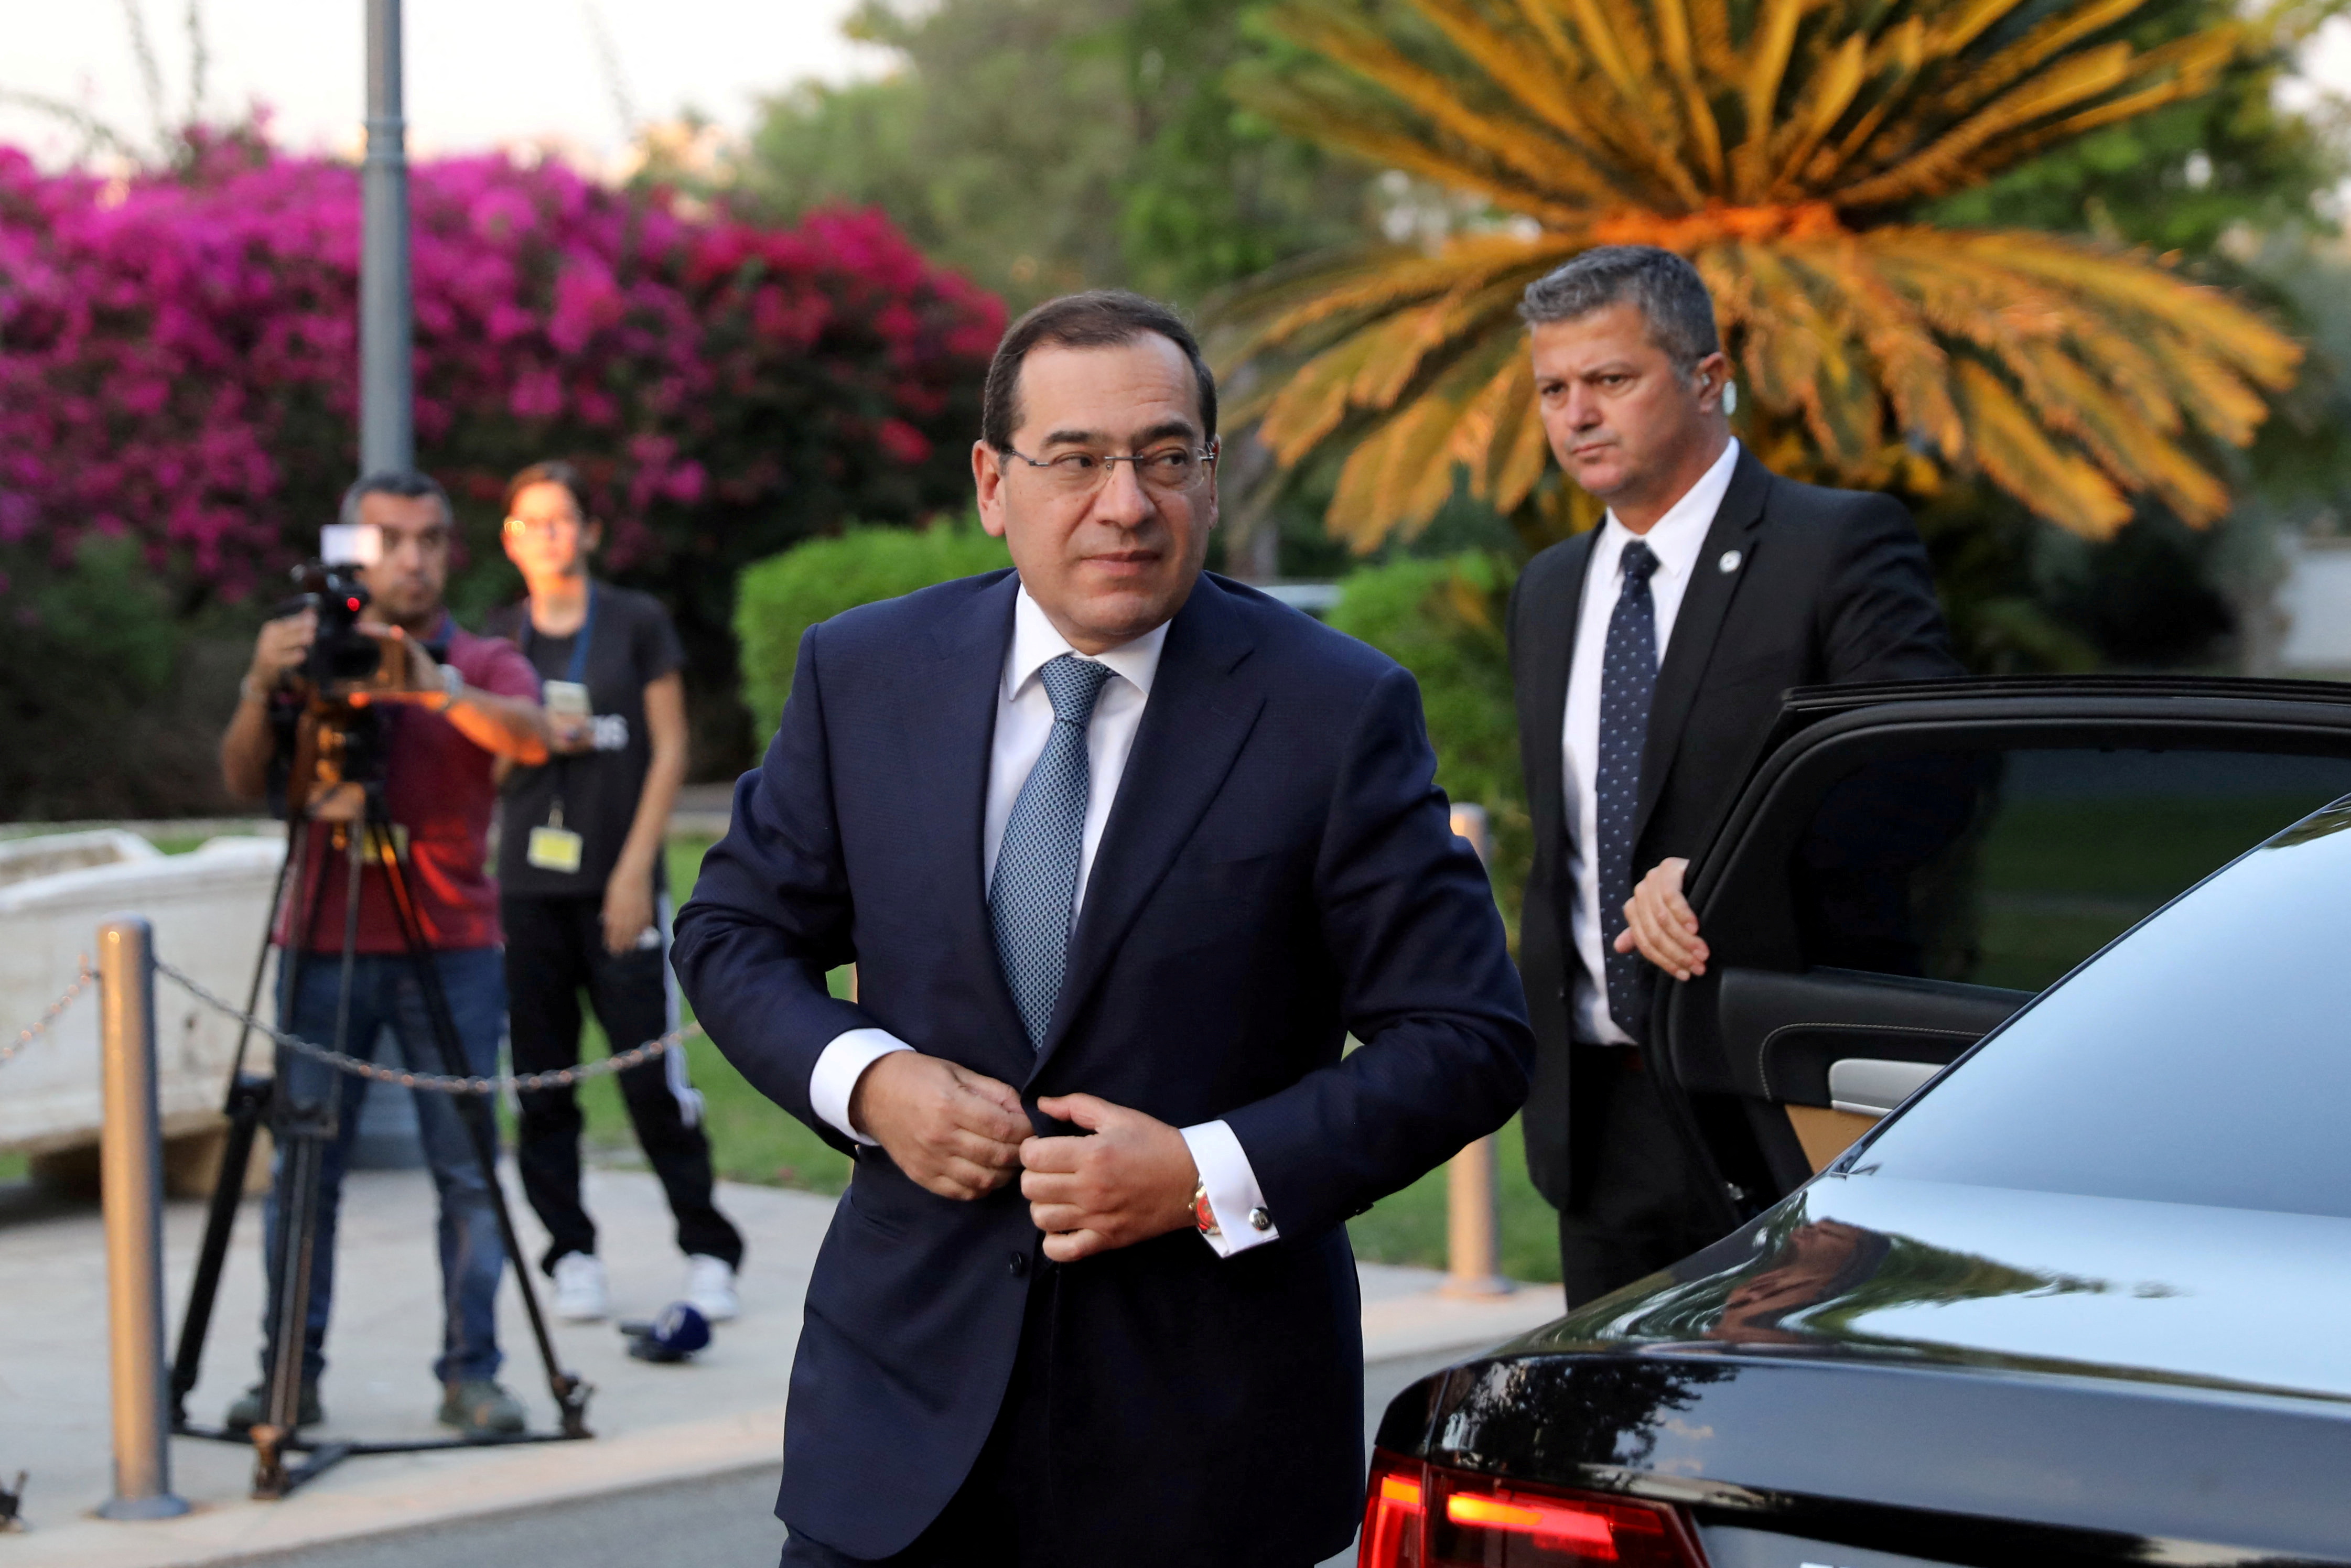 Tarek El Molla, Egypt's Minister of Petroleum and Mineral Resources, arrives for a meeting at the Presidential Palace in Nicosia, Cyprus September 18, 2018. REUTERS/Yiannis Kourtoglou